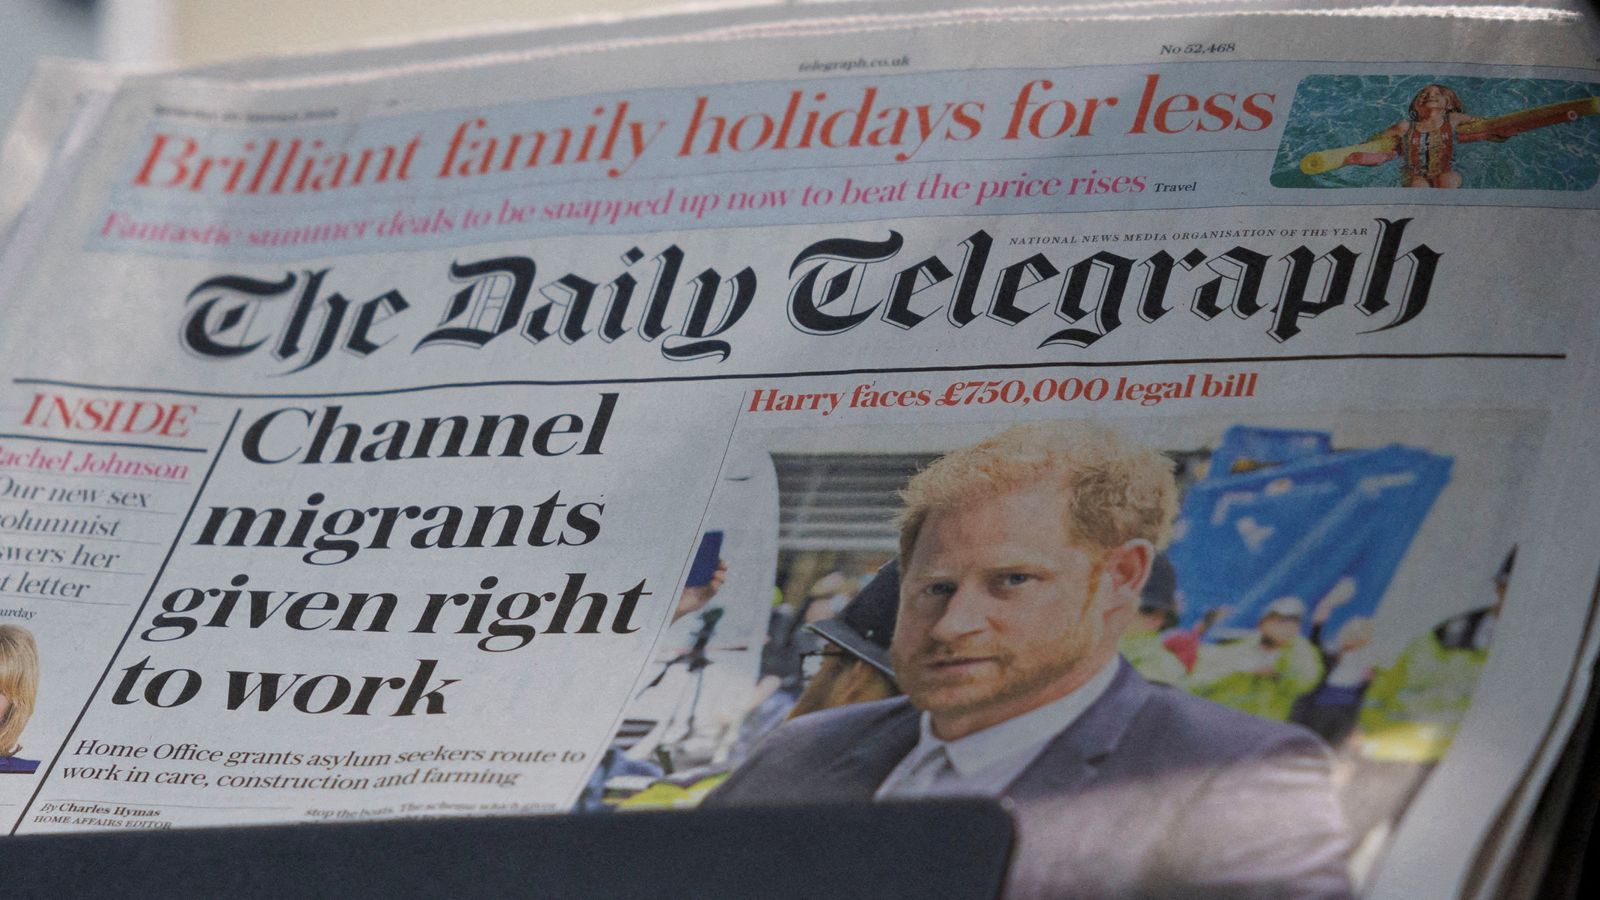 Telegraph put up for sale after ownership battle with government